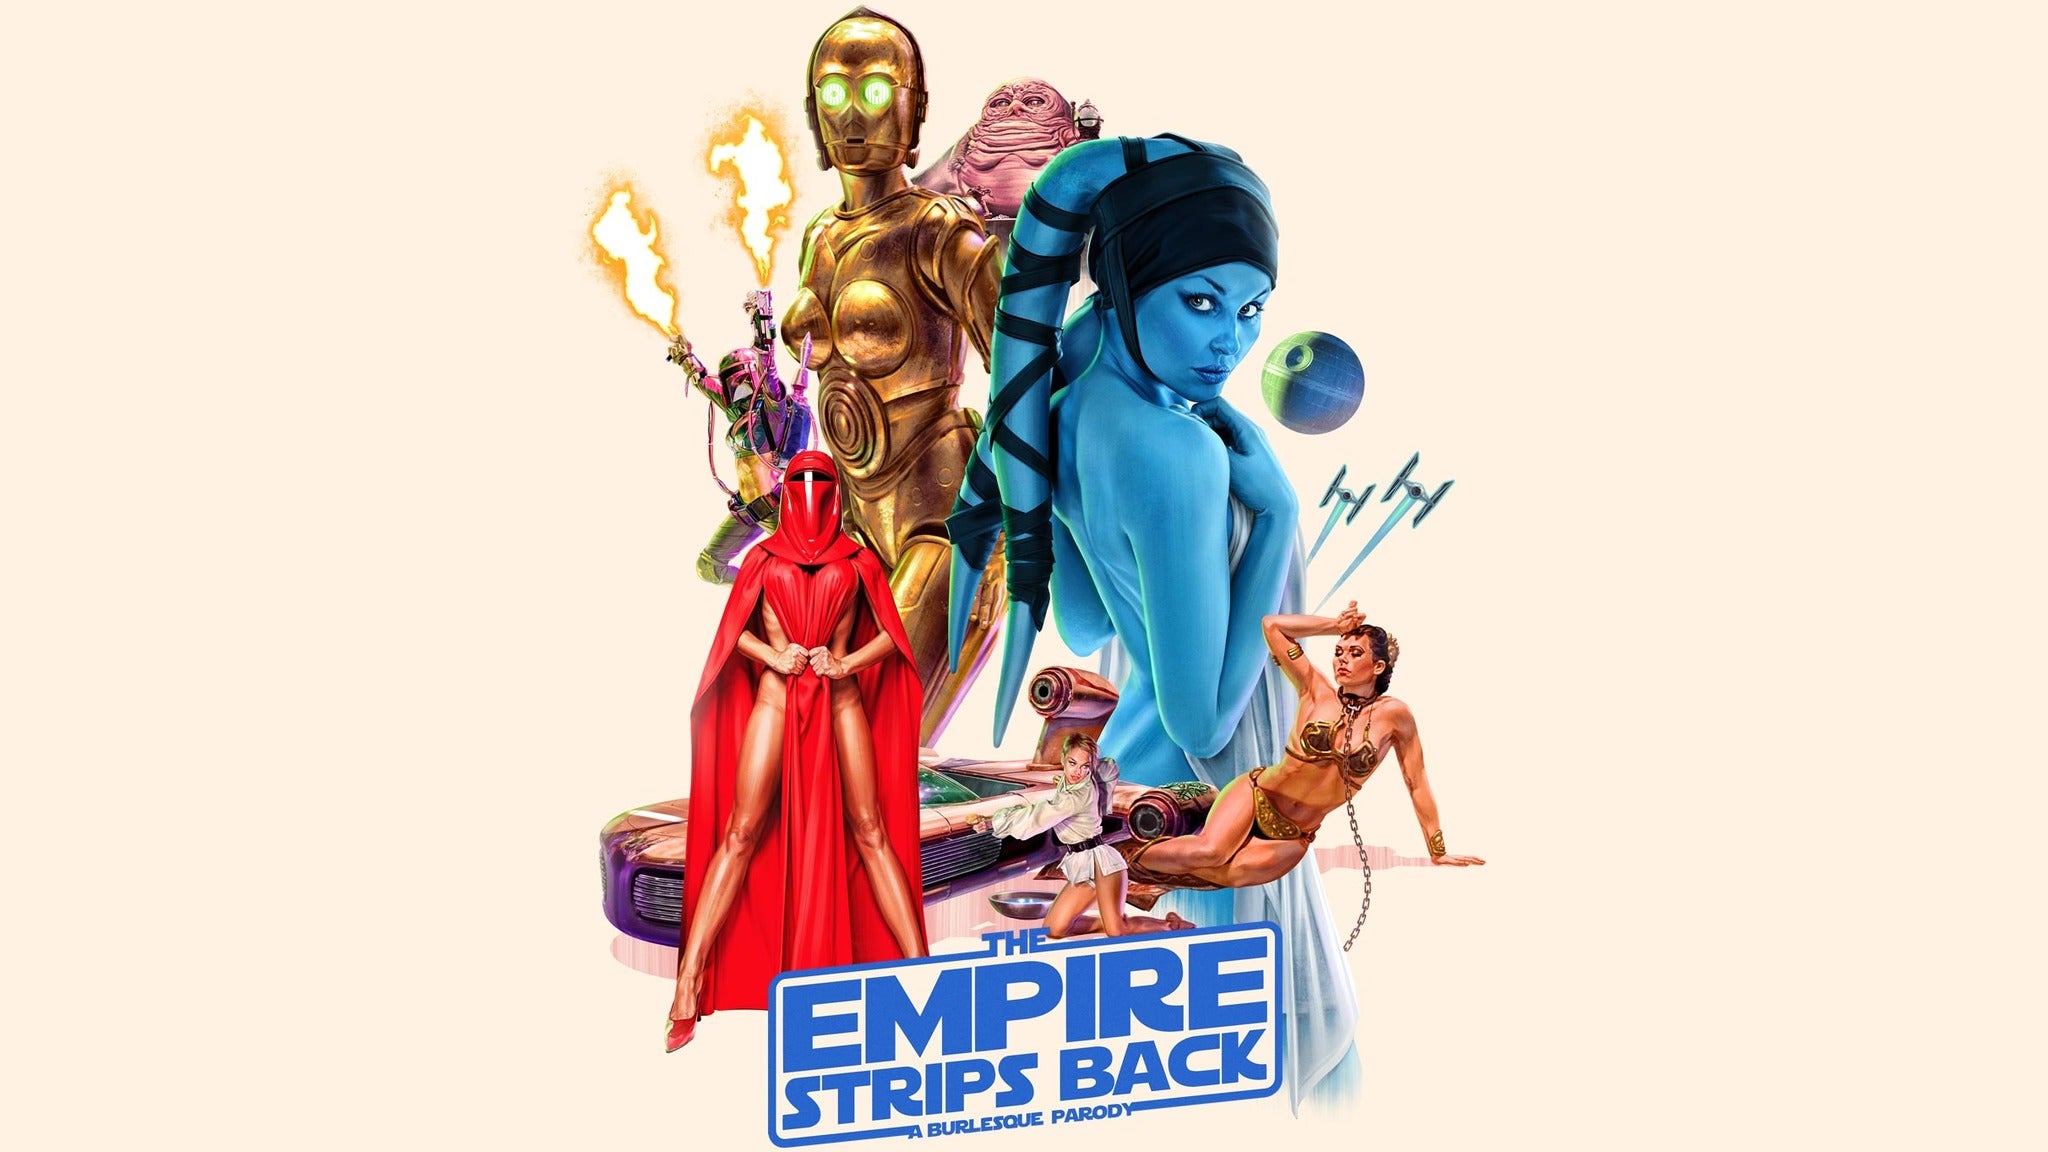 The Empire Strips Back: A Burlesque Parody in Indianapolis promo photo for VIP Package presale offer code